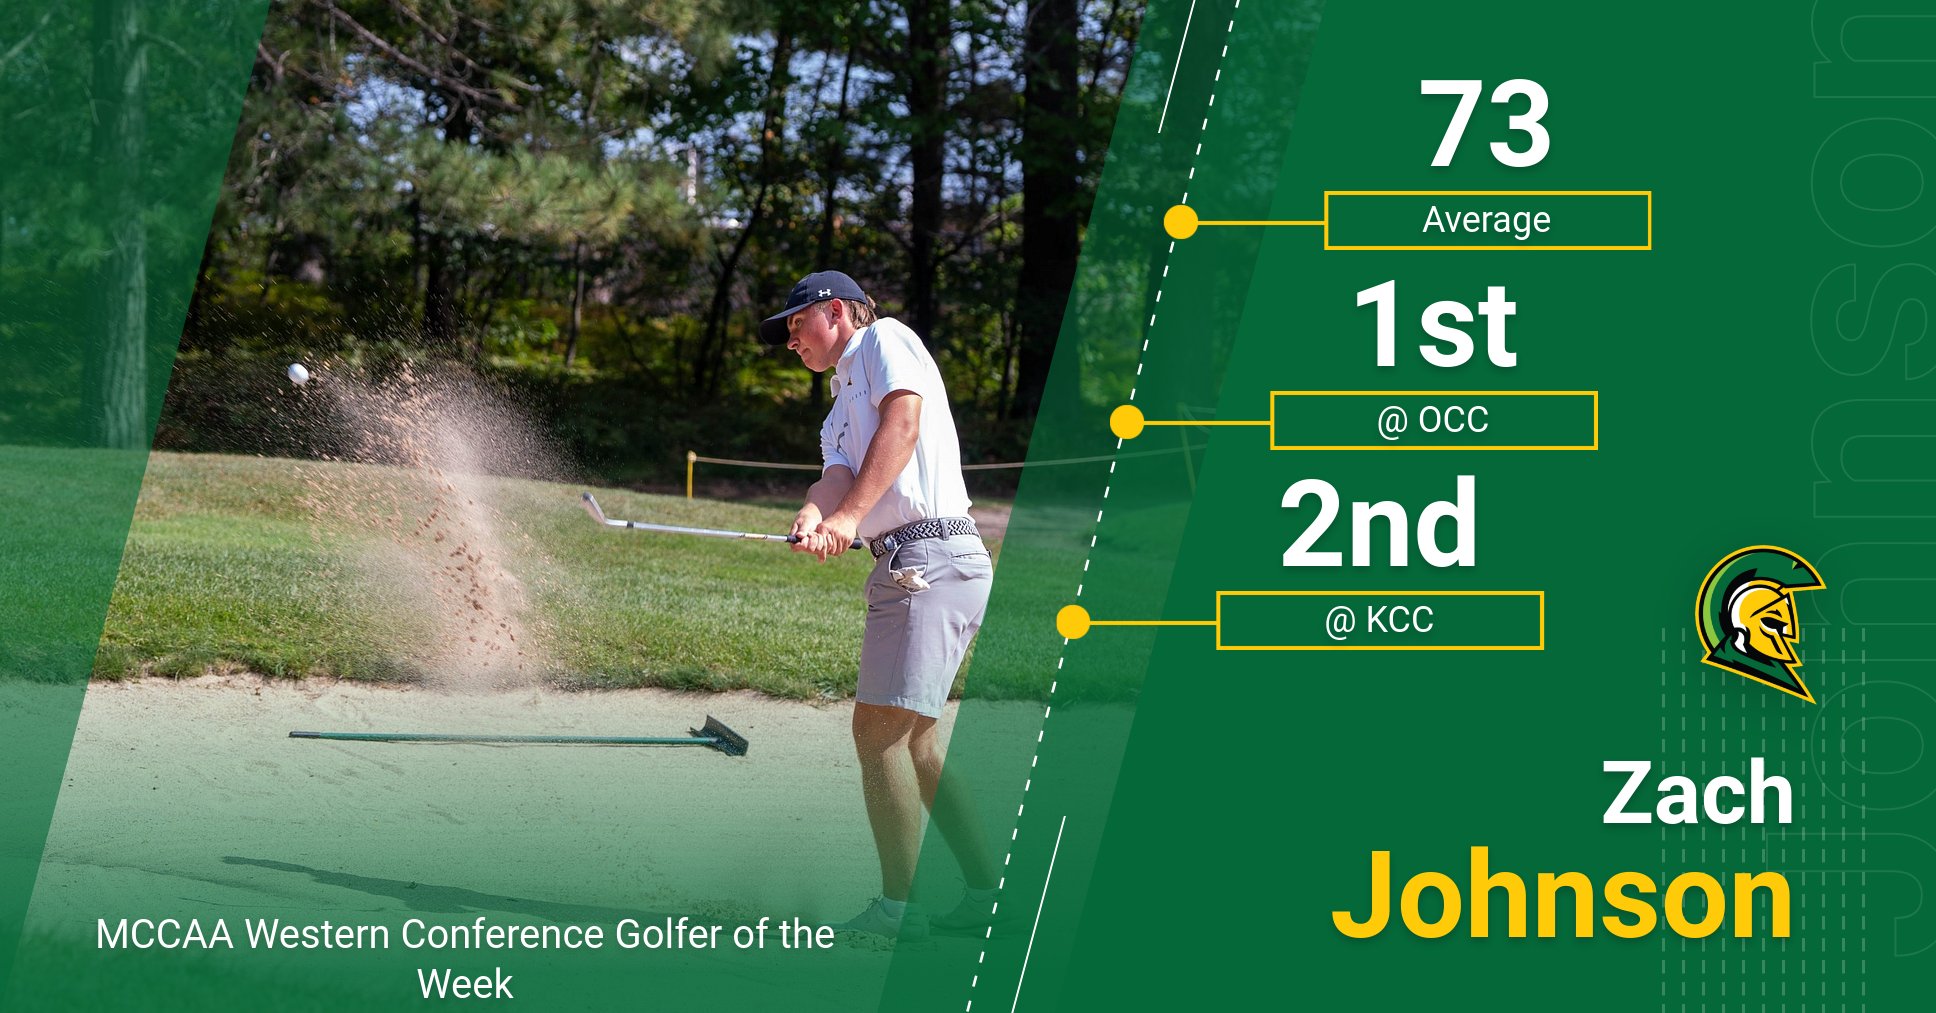 Zach Johnson named MCCAA Western Conference Golfer of the Week